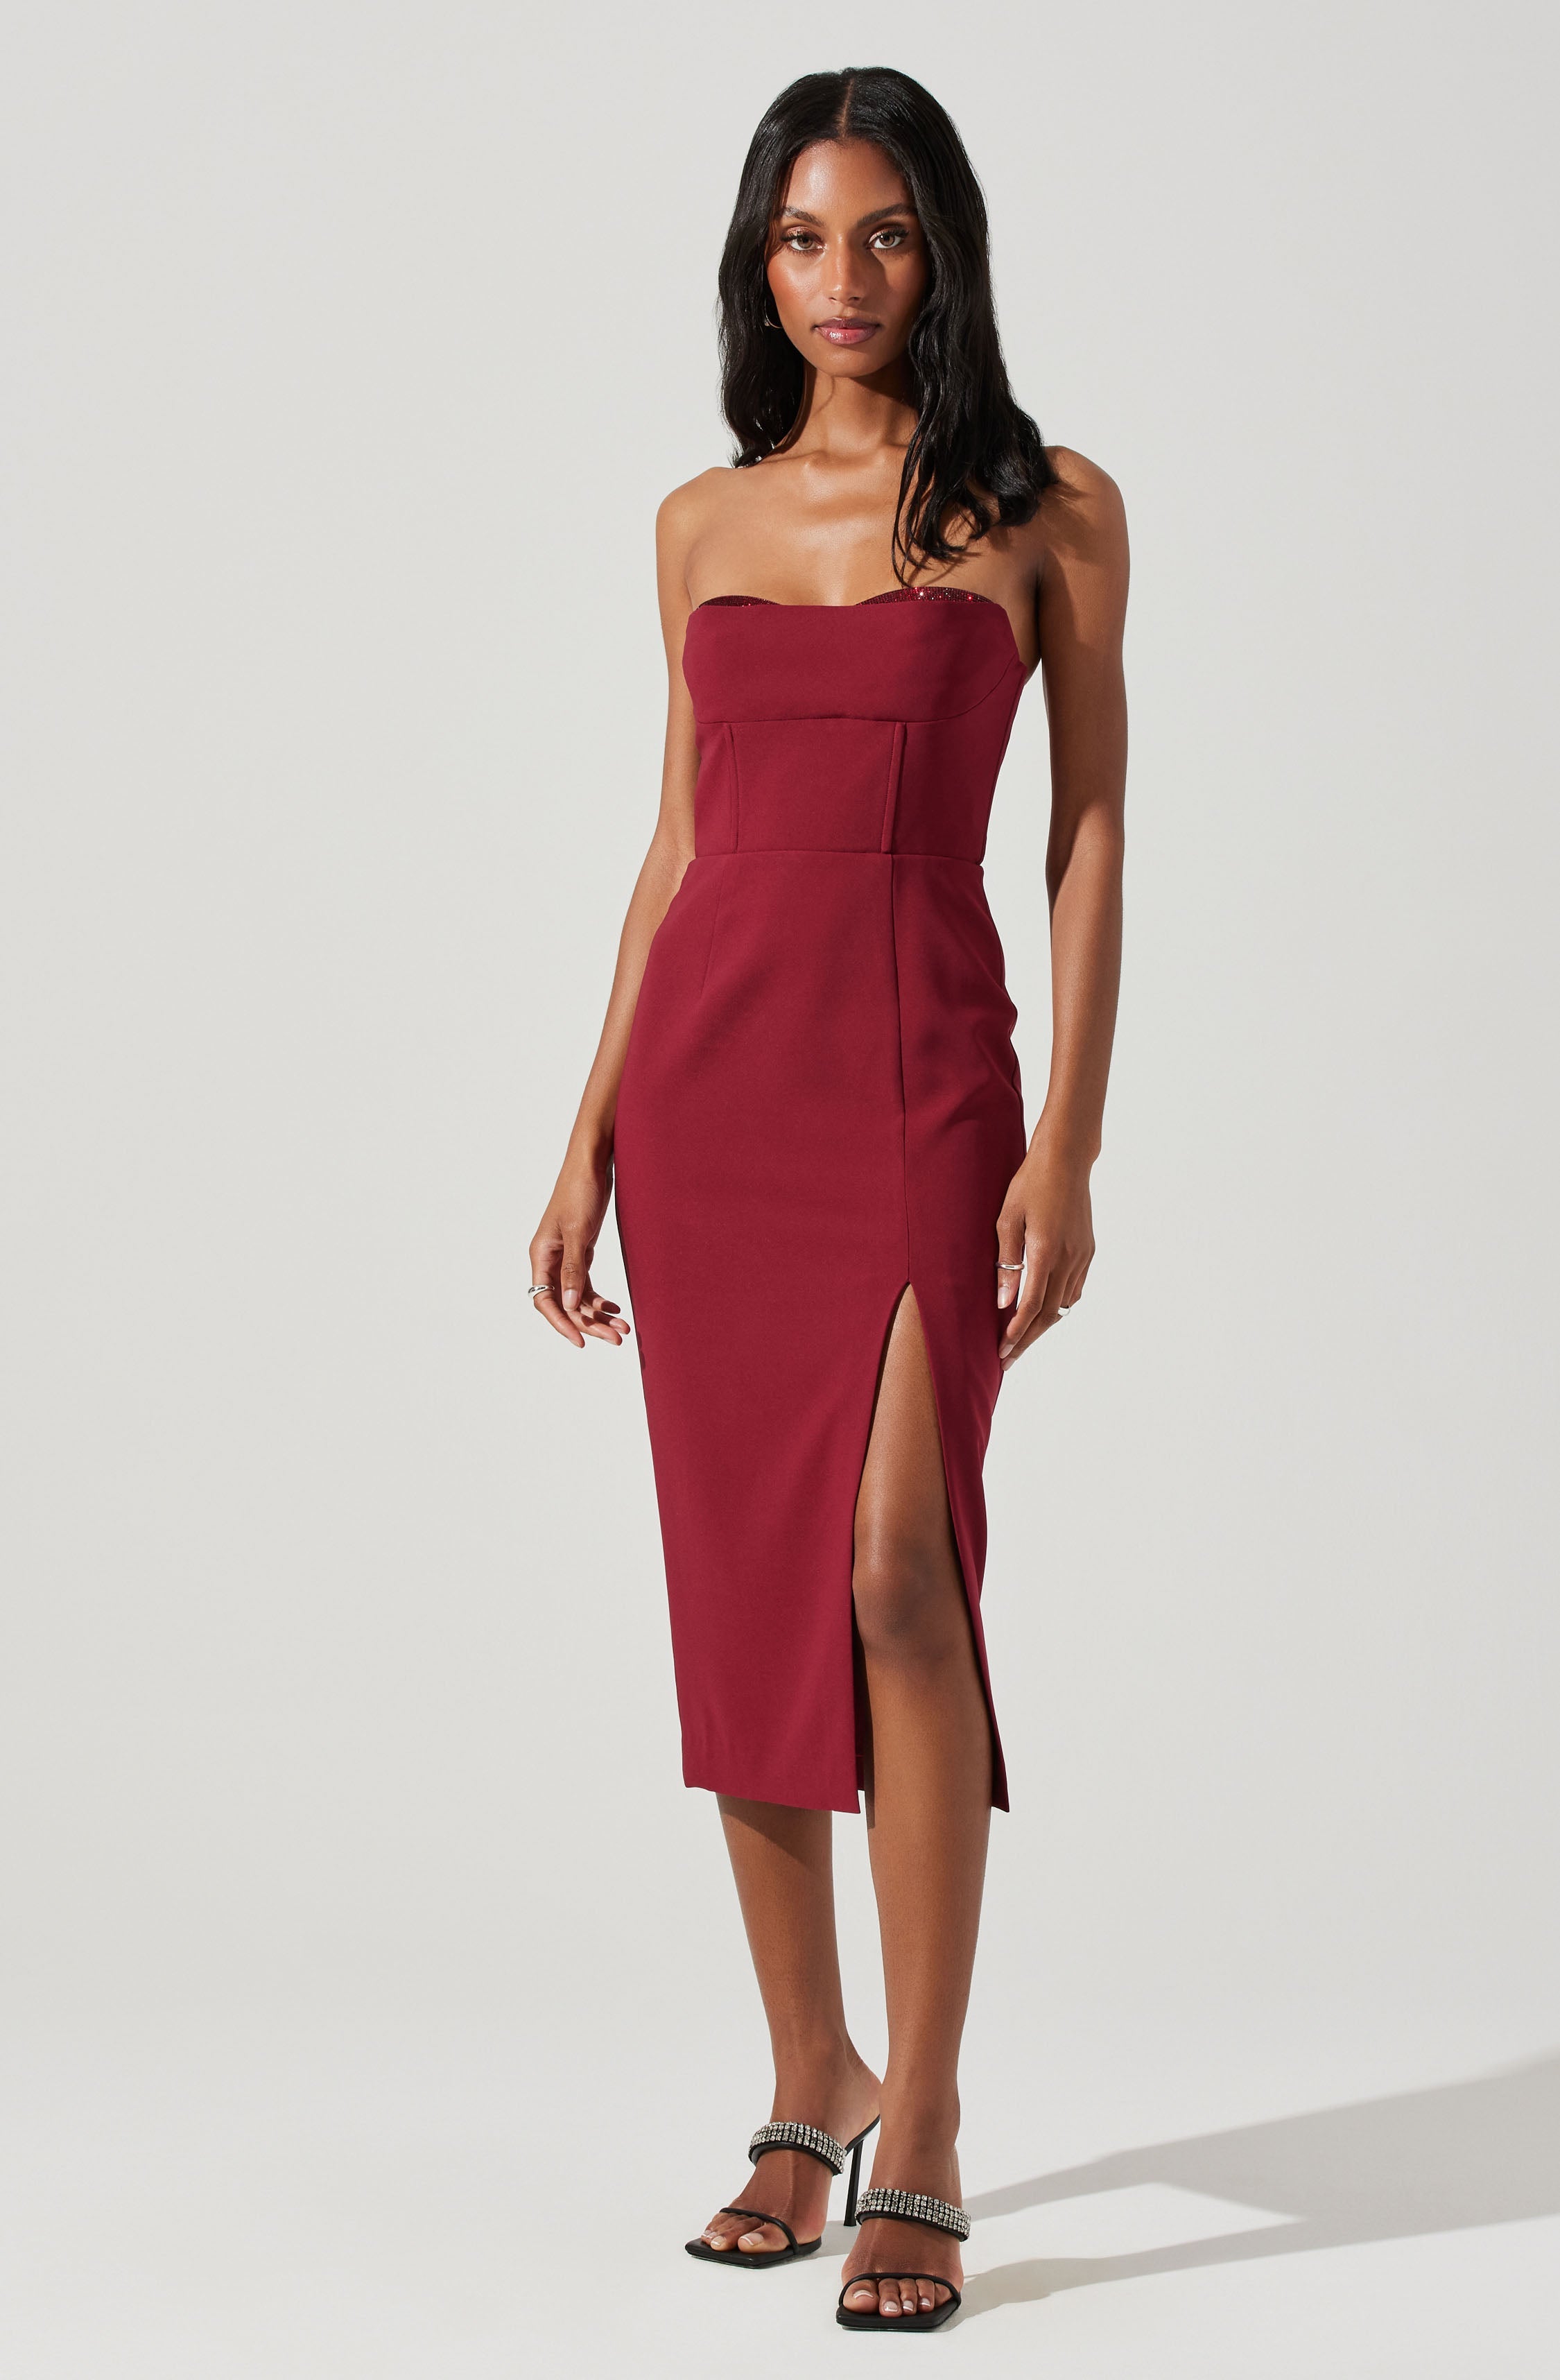 Spring Wedding Guest Dresses Under $100 - Red Soles and Red Wine